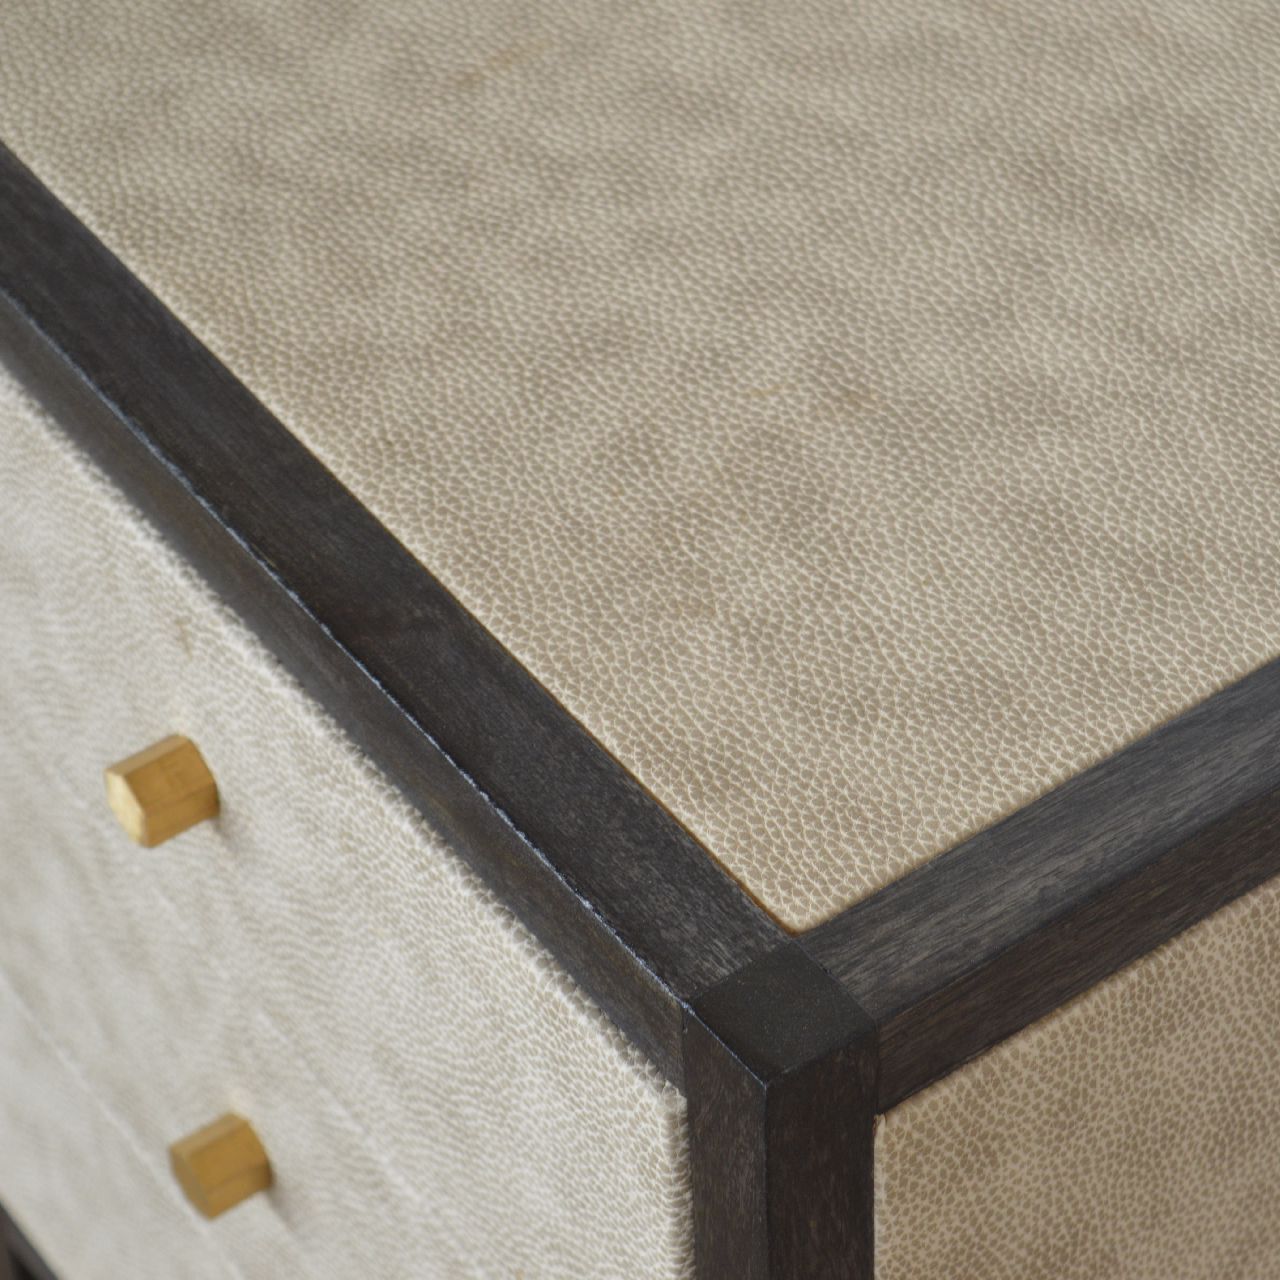 Faux Leather Bedside Cabinet